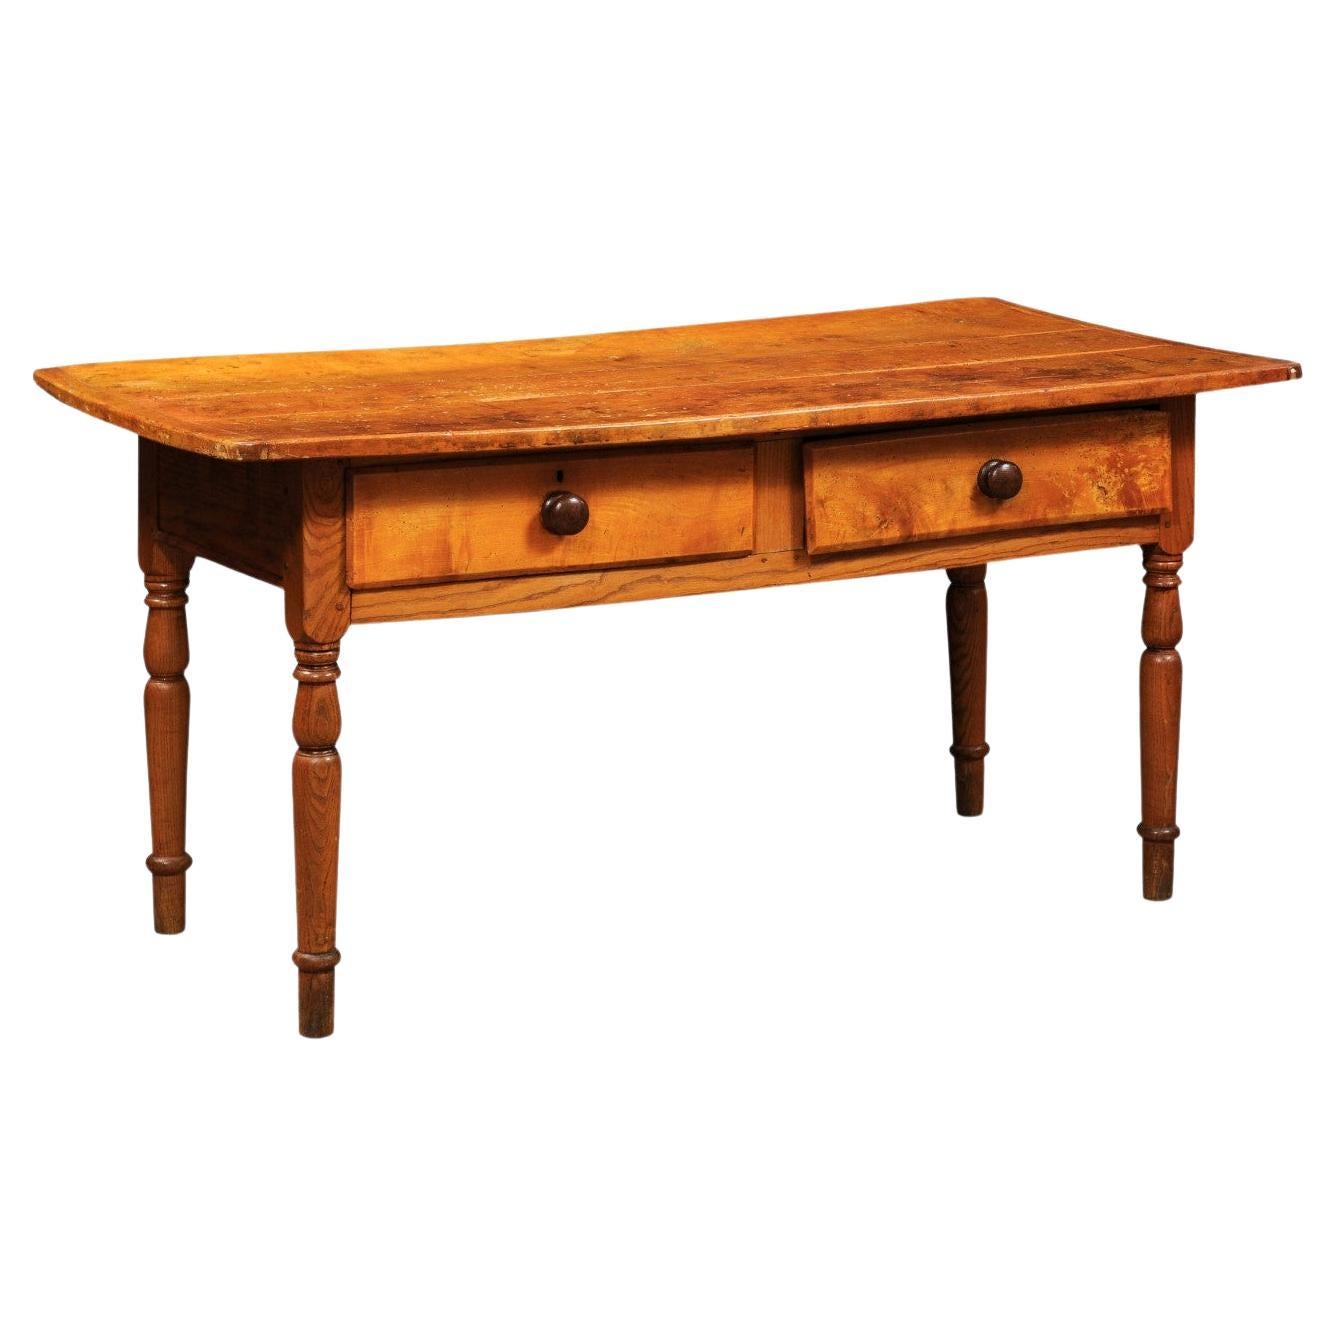 Large American Pine Kitchen Table with 2 Deep Drawers and Turned Legs, c1890